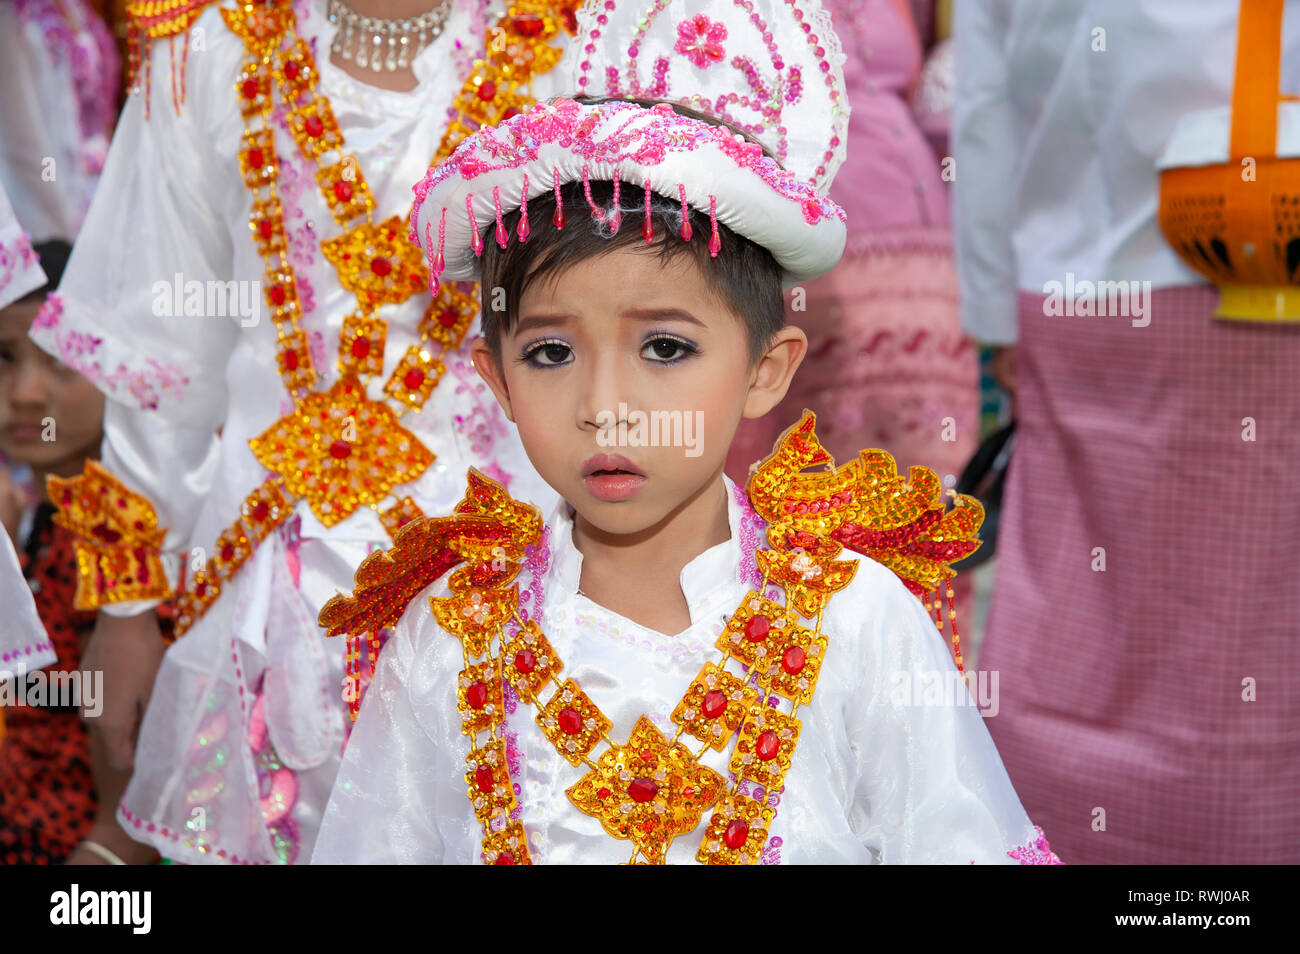 A young Burmese boy dressed in Buddhist costume and face made up with makeup attends his coming of age ceremony in Mandalay Myanmar Stock Photo